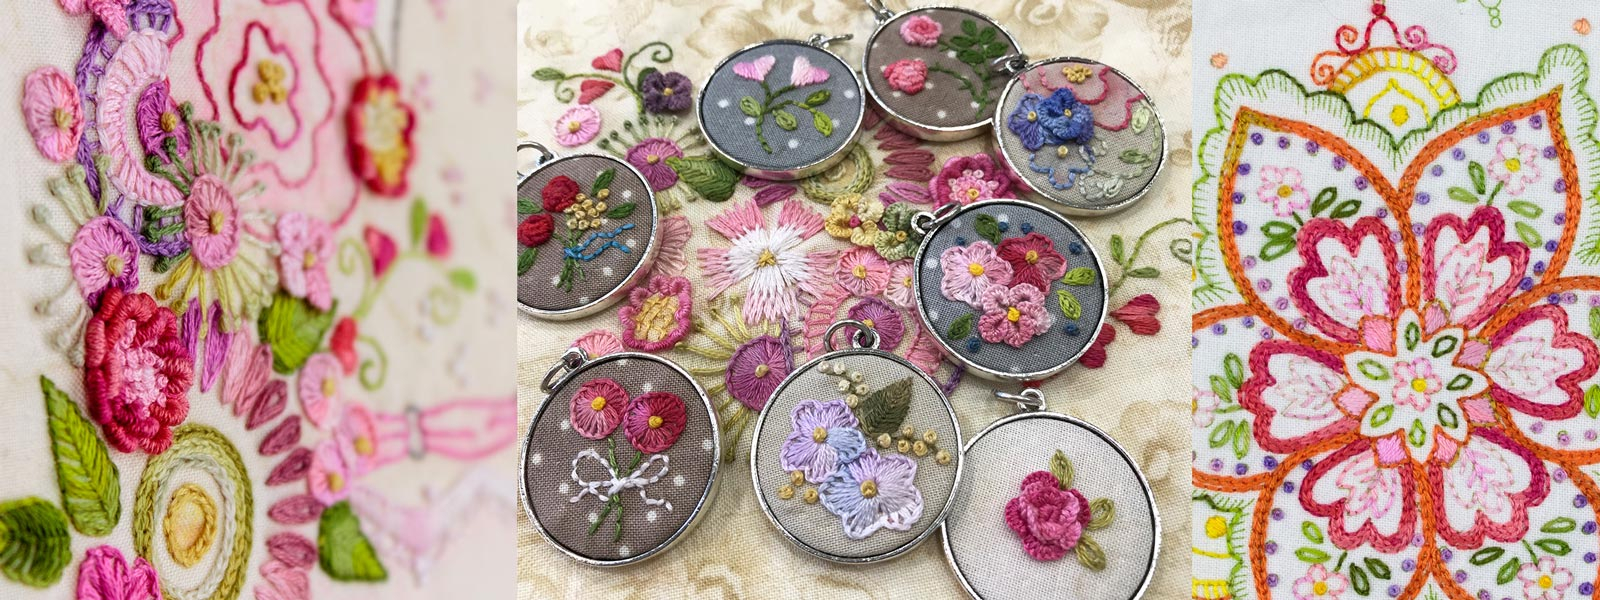 Crabapple Hill Embroidery Patterns Homepage